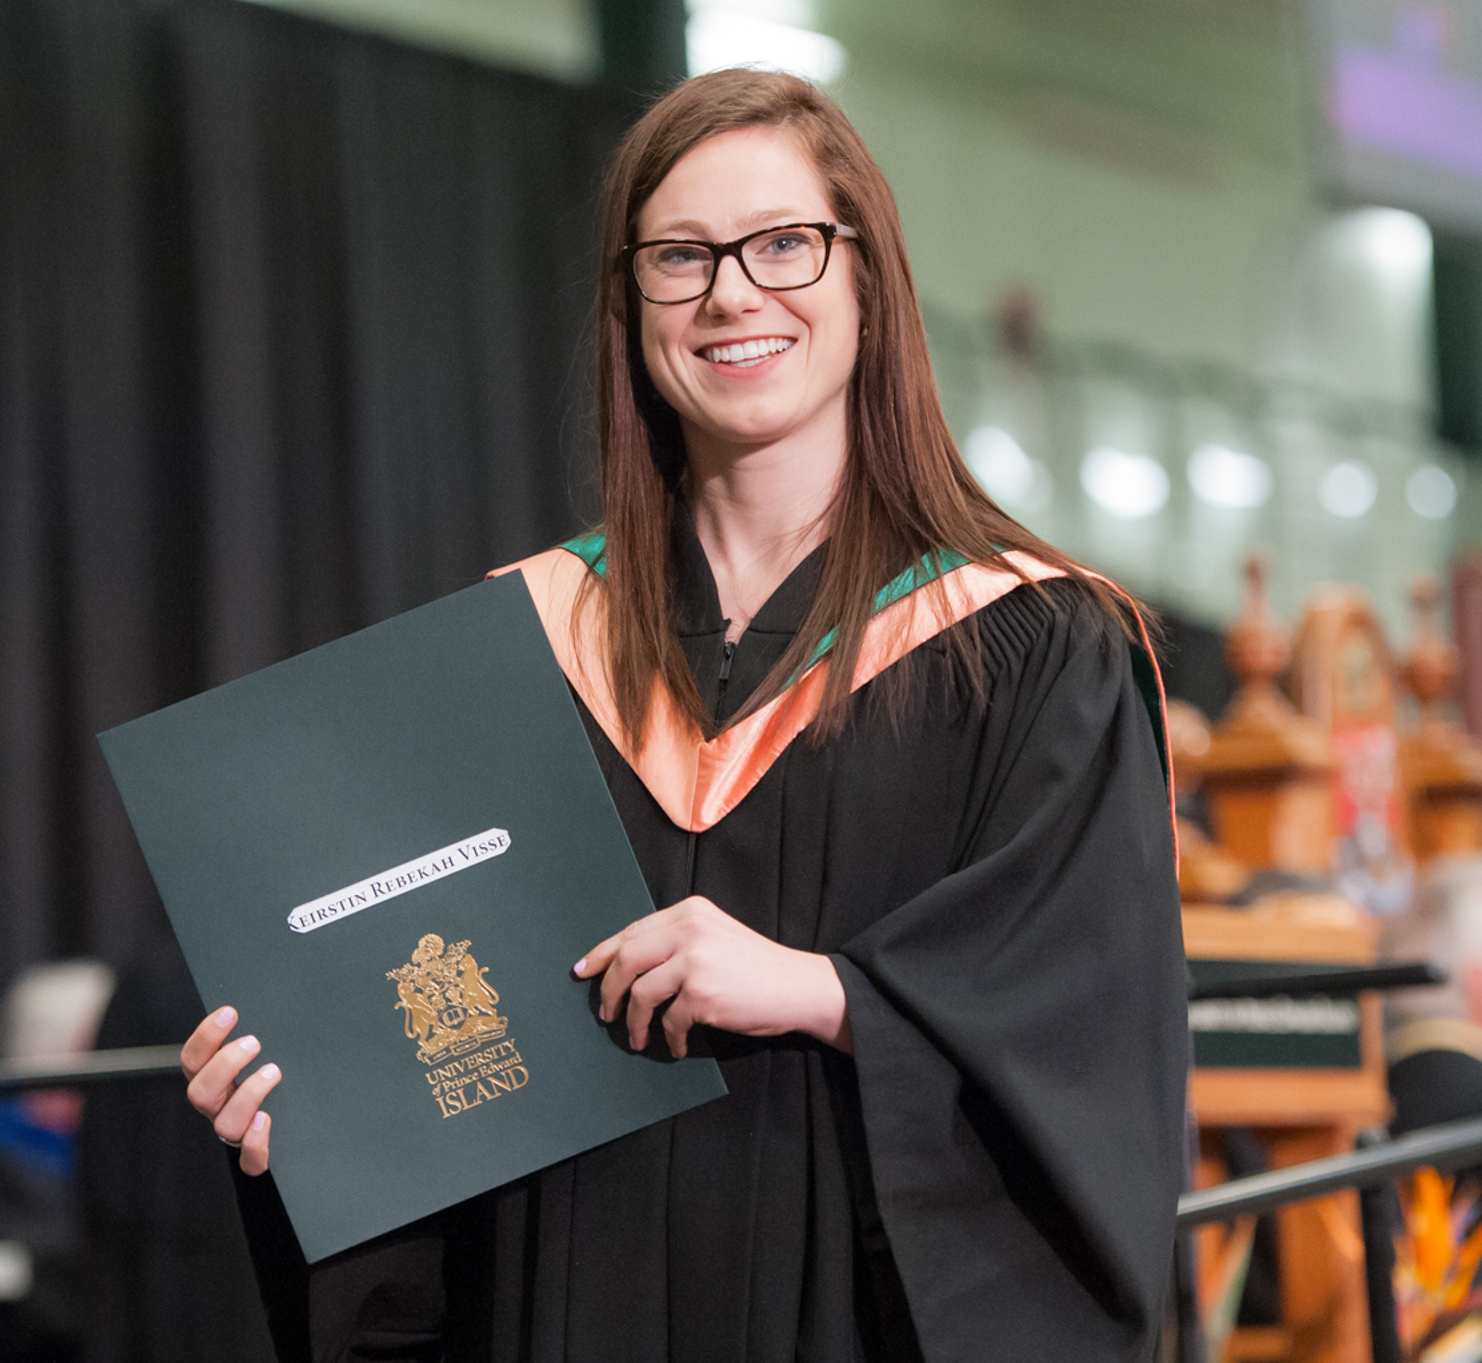 A graduate stands with her degree